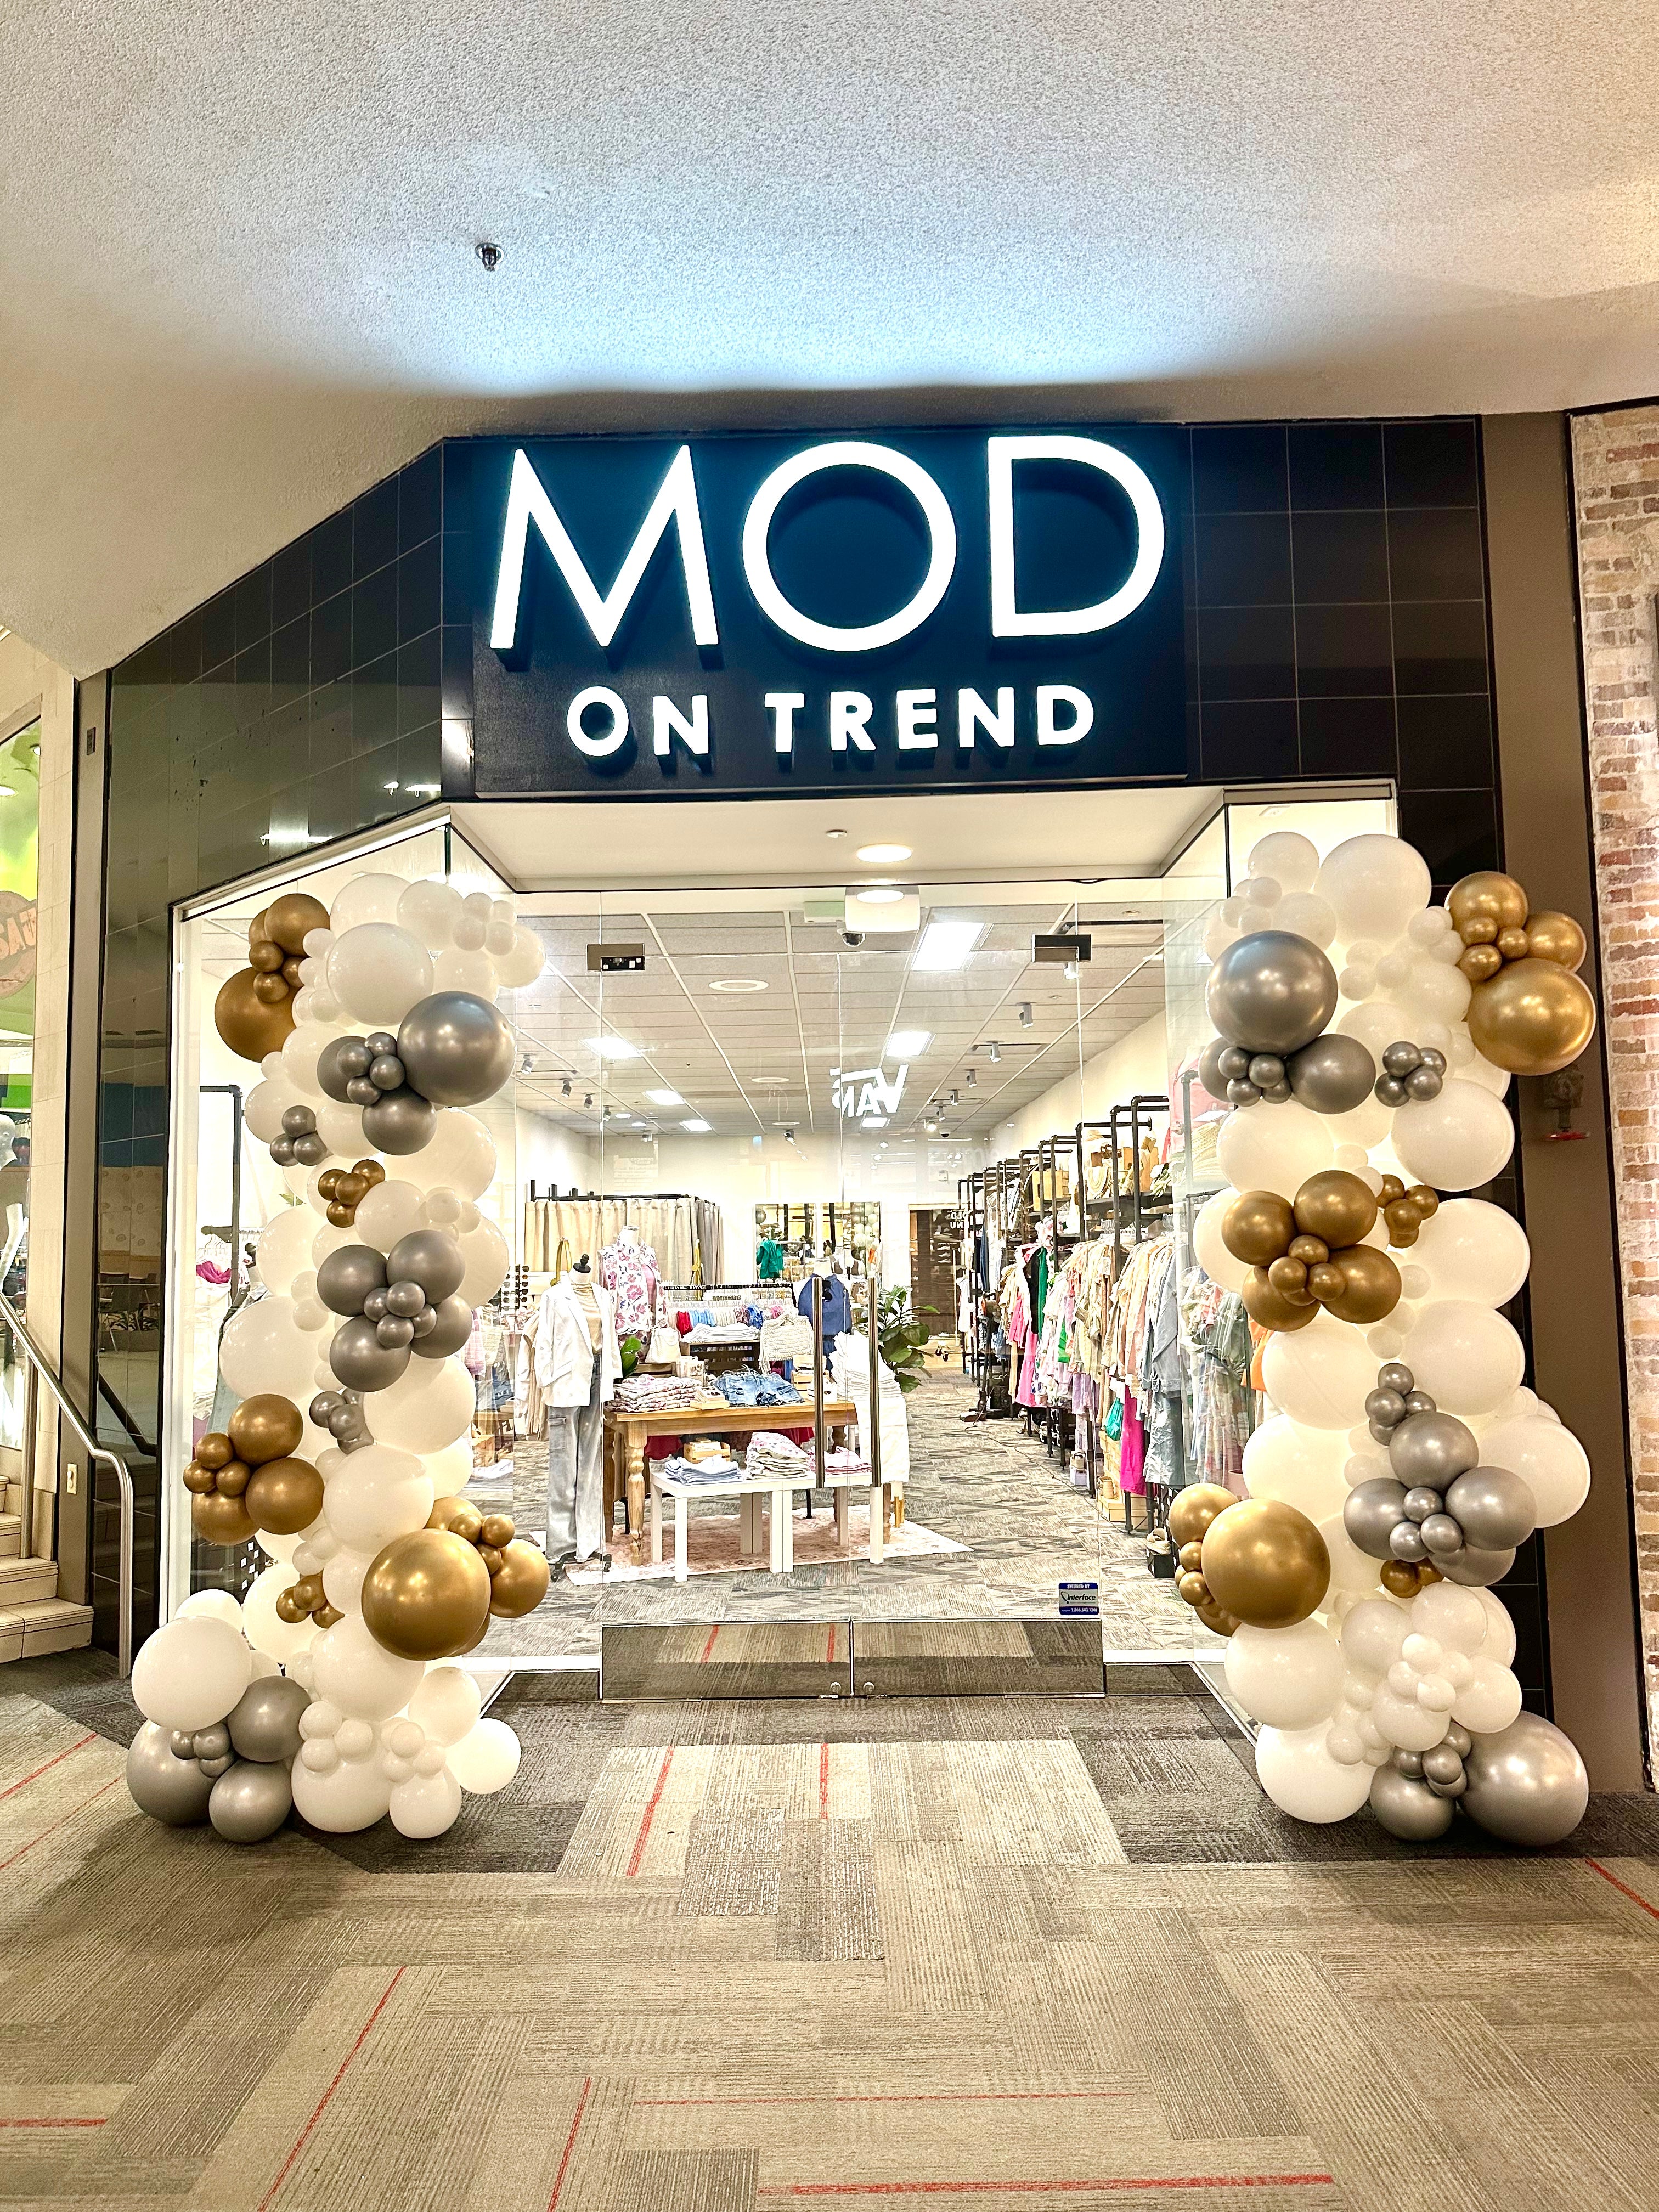 MOD On Trend entrance at Battlefield Mall.